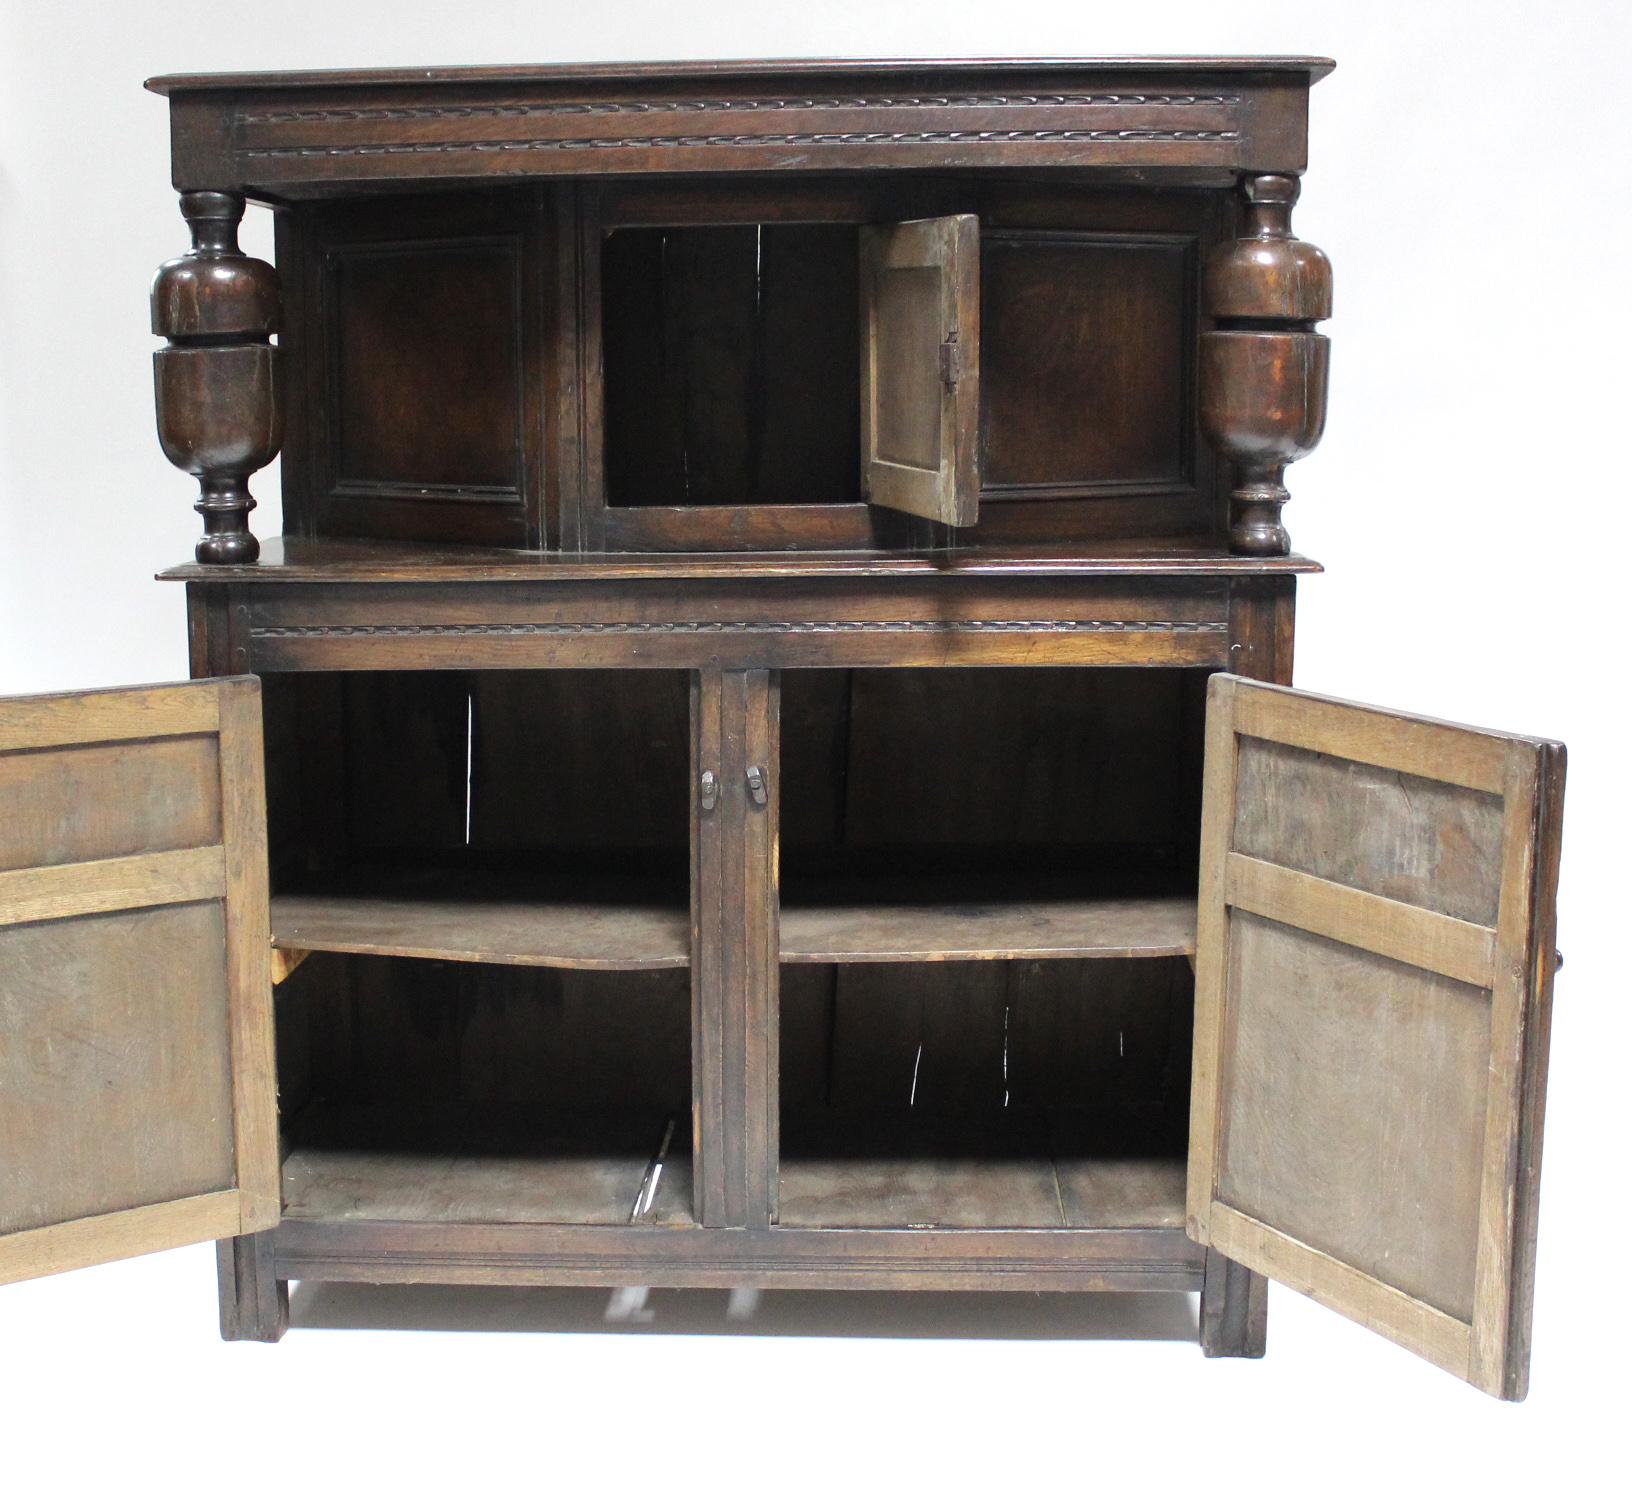 A 17th century-style joined oak court cupboard, the upper part with craved frieze & central panel - Image 3 of 8